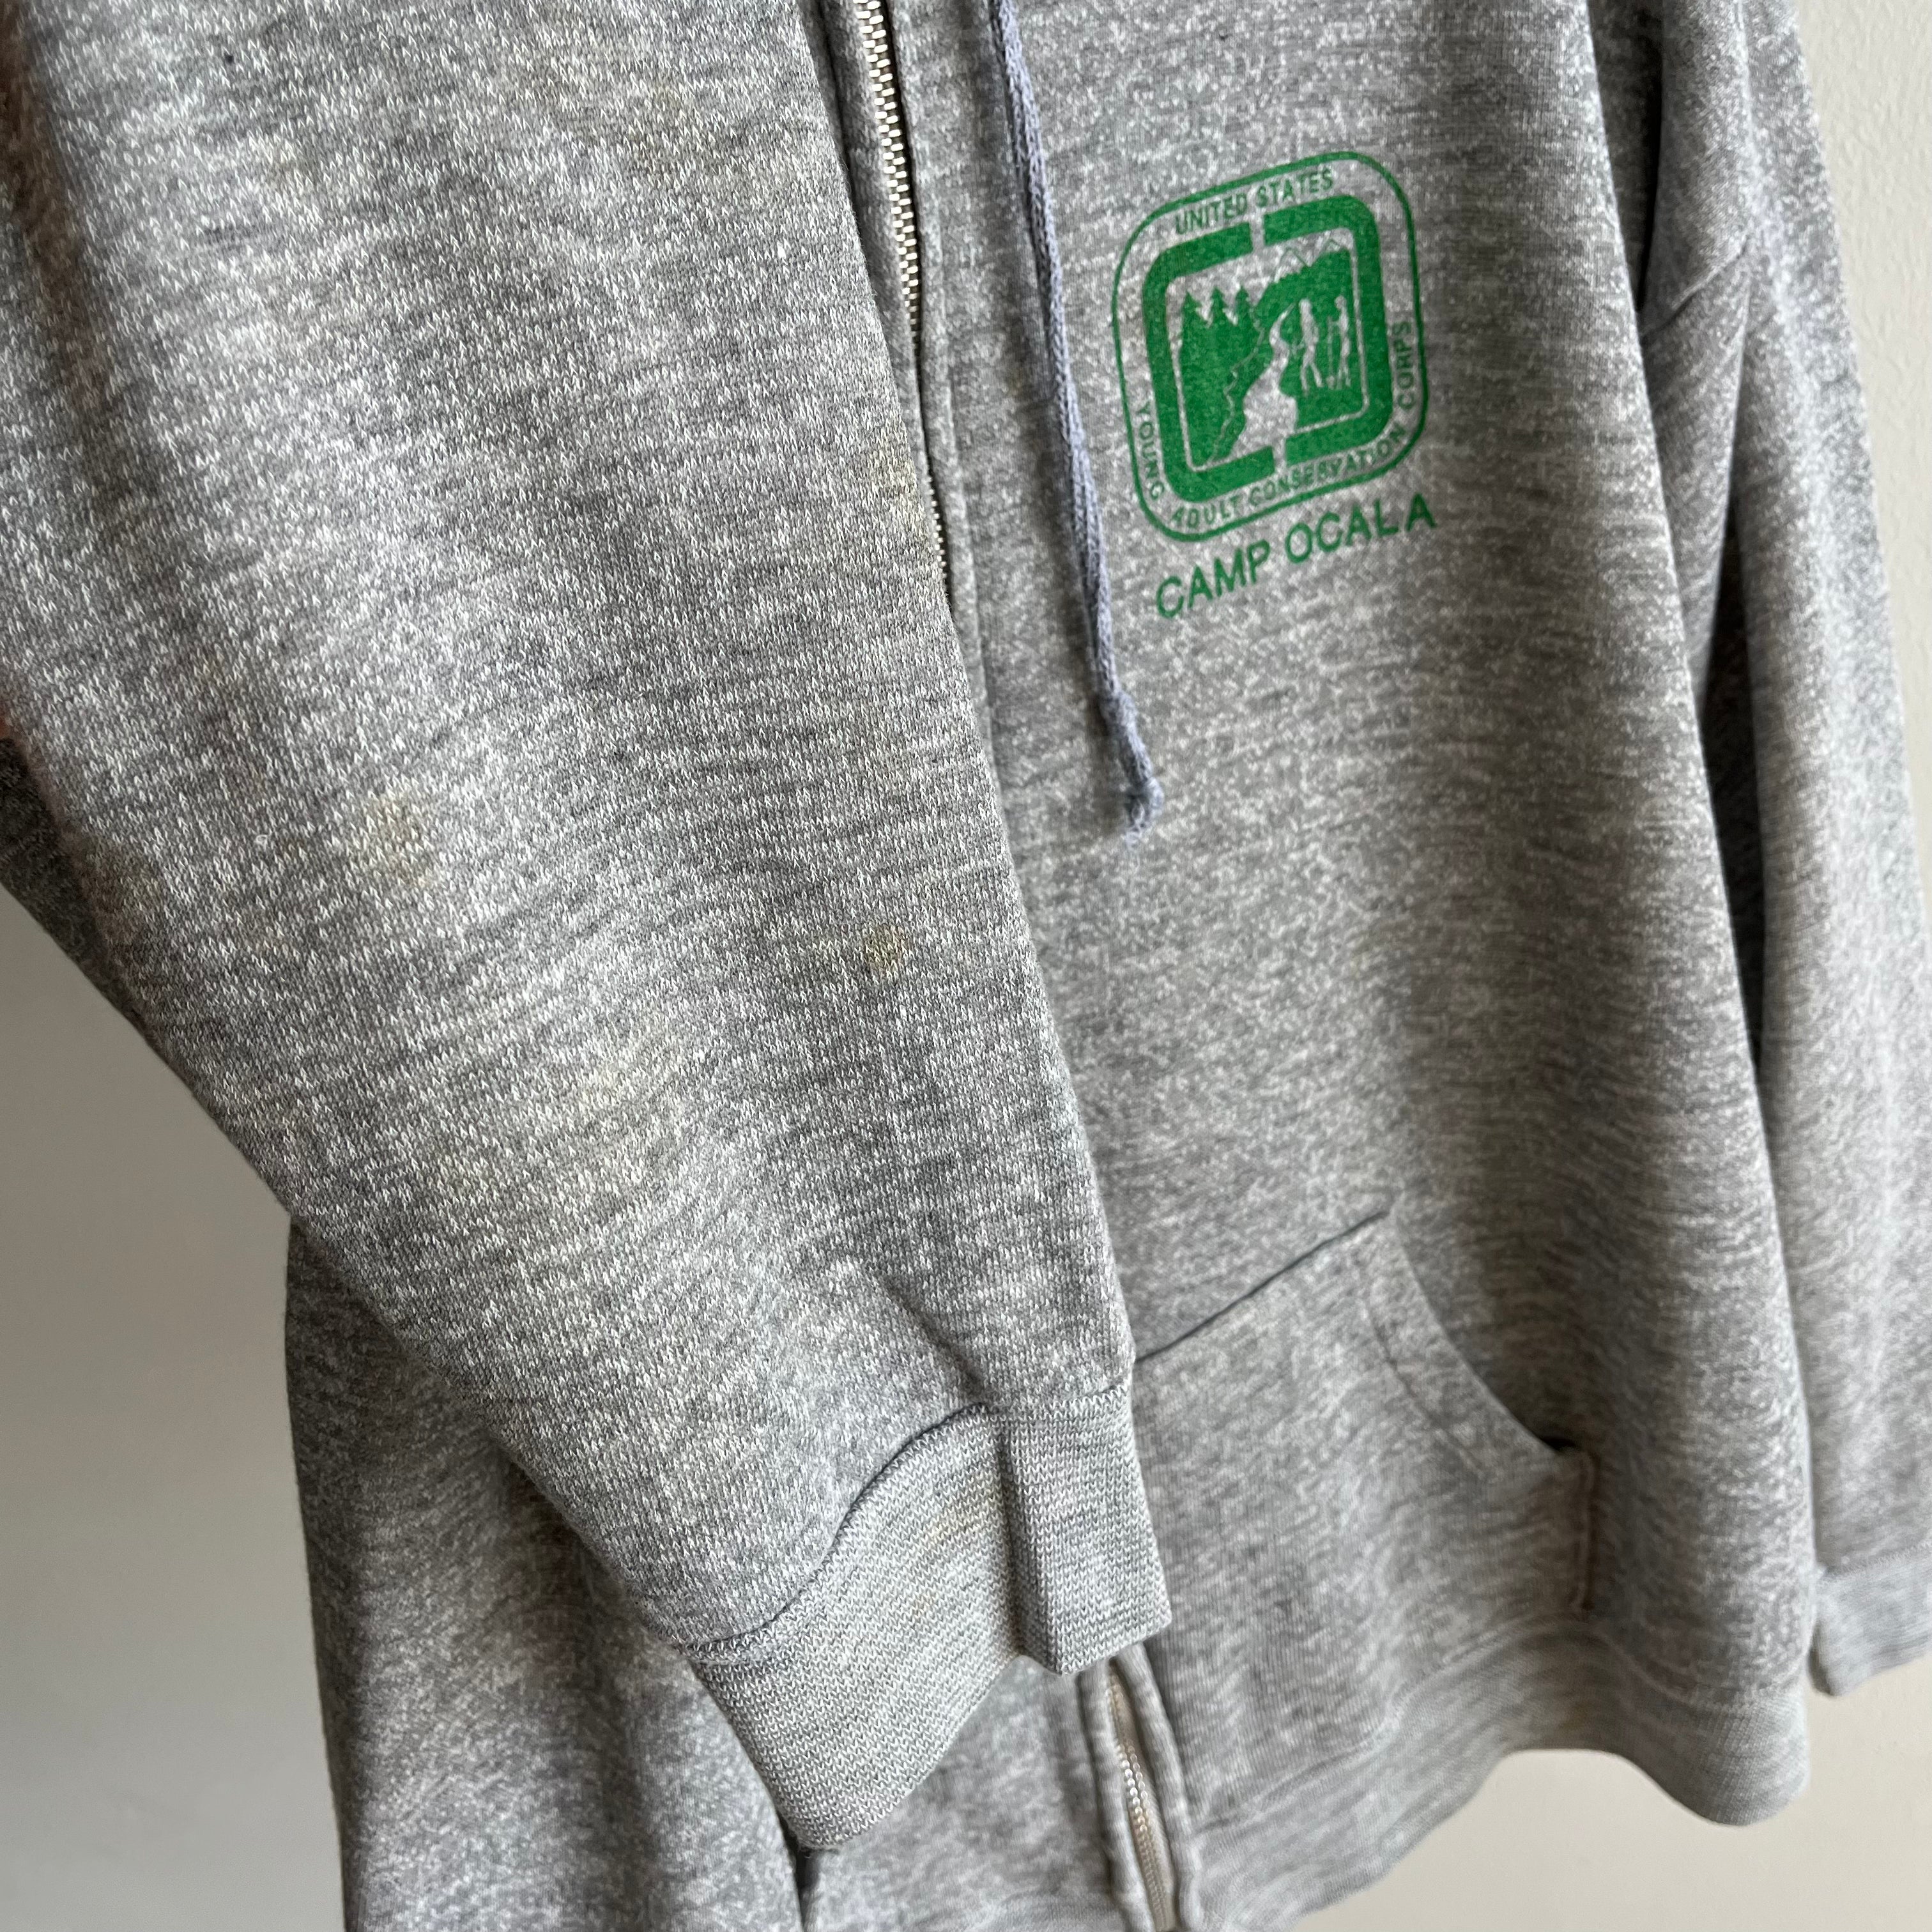 1970s Camp Ocala Young Adult Conservation Corps Zip Up Hoodie